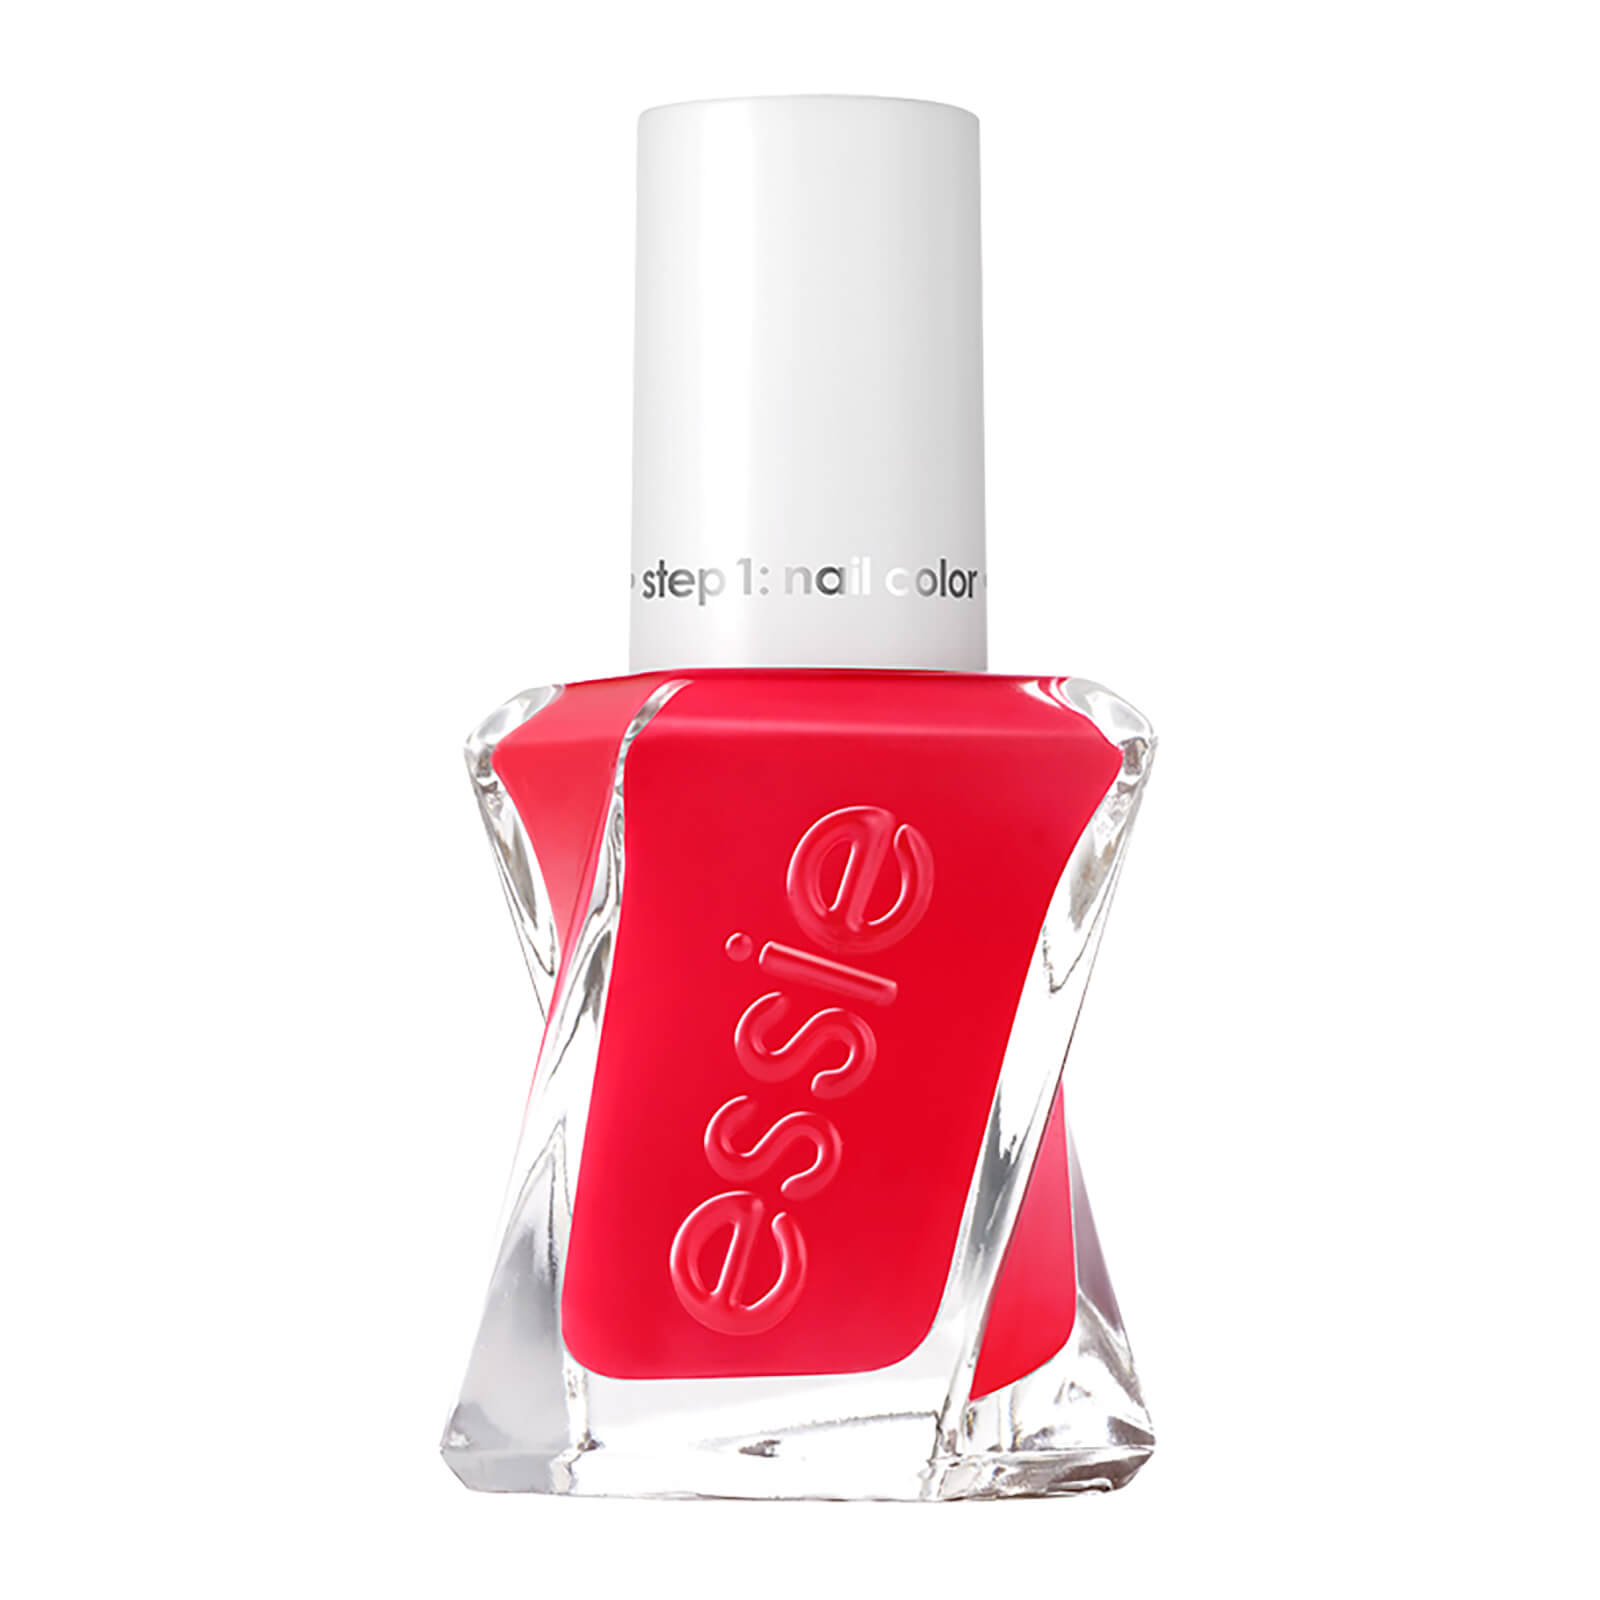 Image of essie Gel Couture Long Lasting High Shine Gel Nail Polish - 470 Sizzling Hot Bright Red 13.5ml